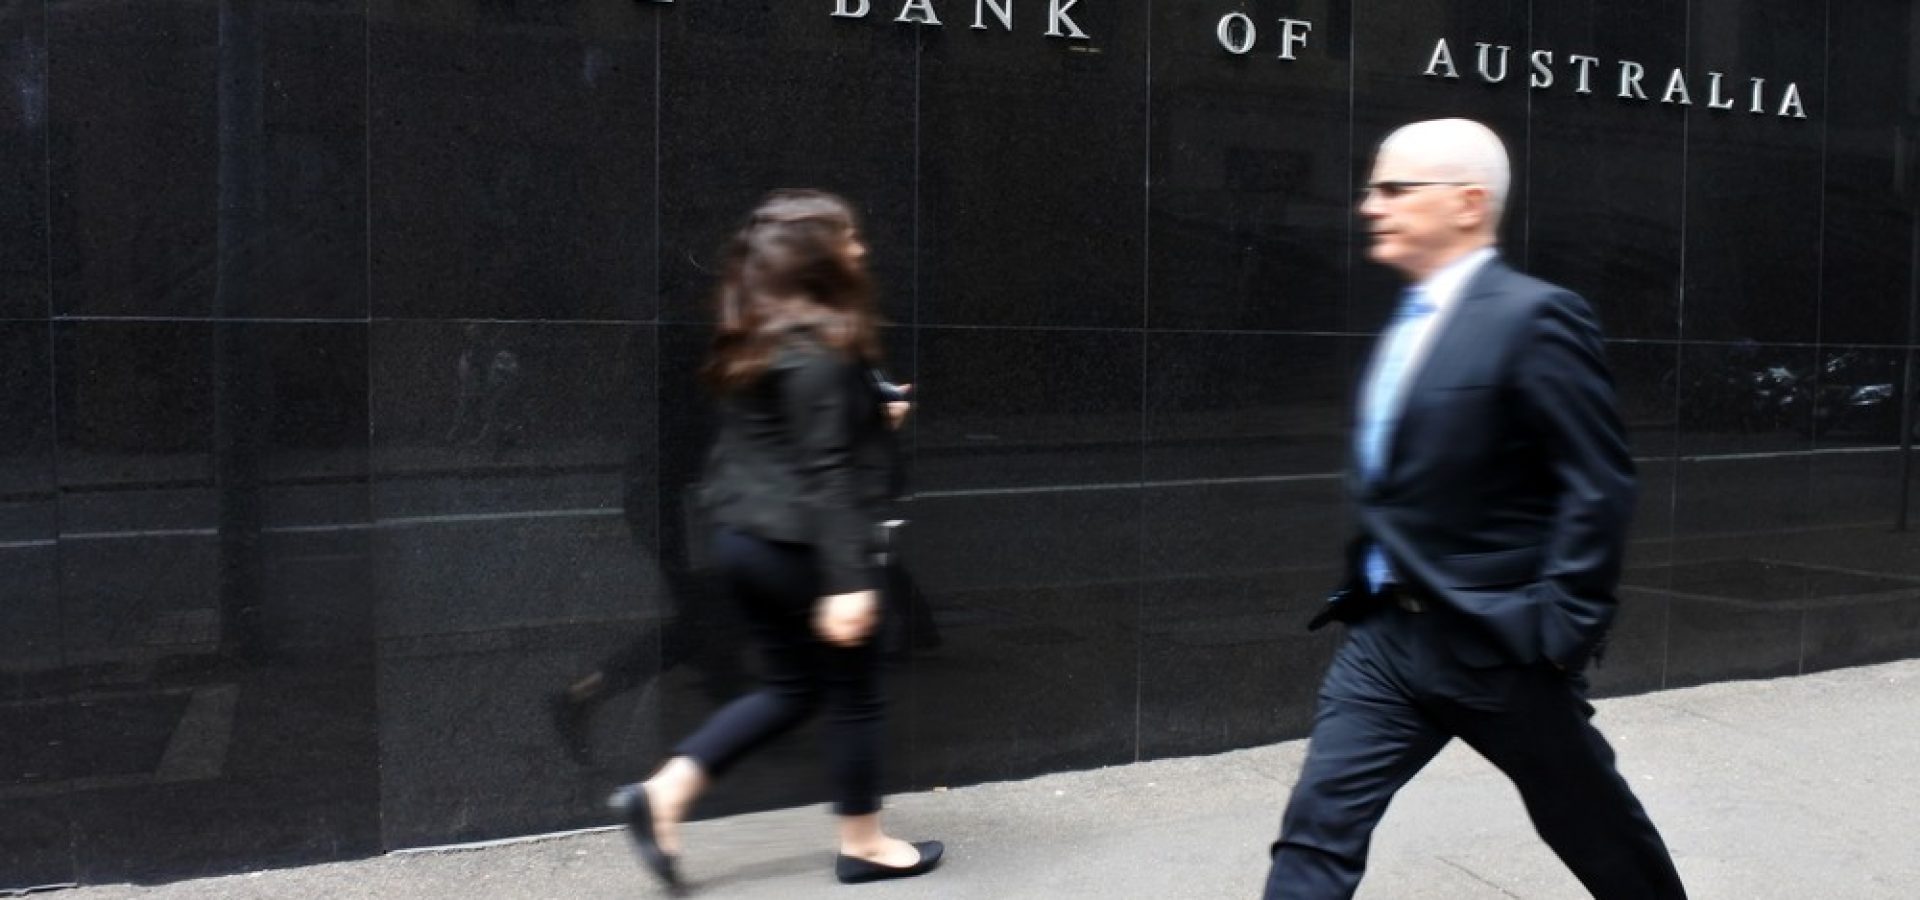 Wibest – Reserve Bank of Australia: People walking in front of the RBA’s main building.